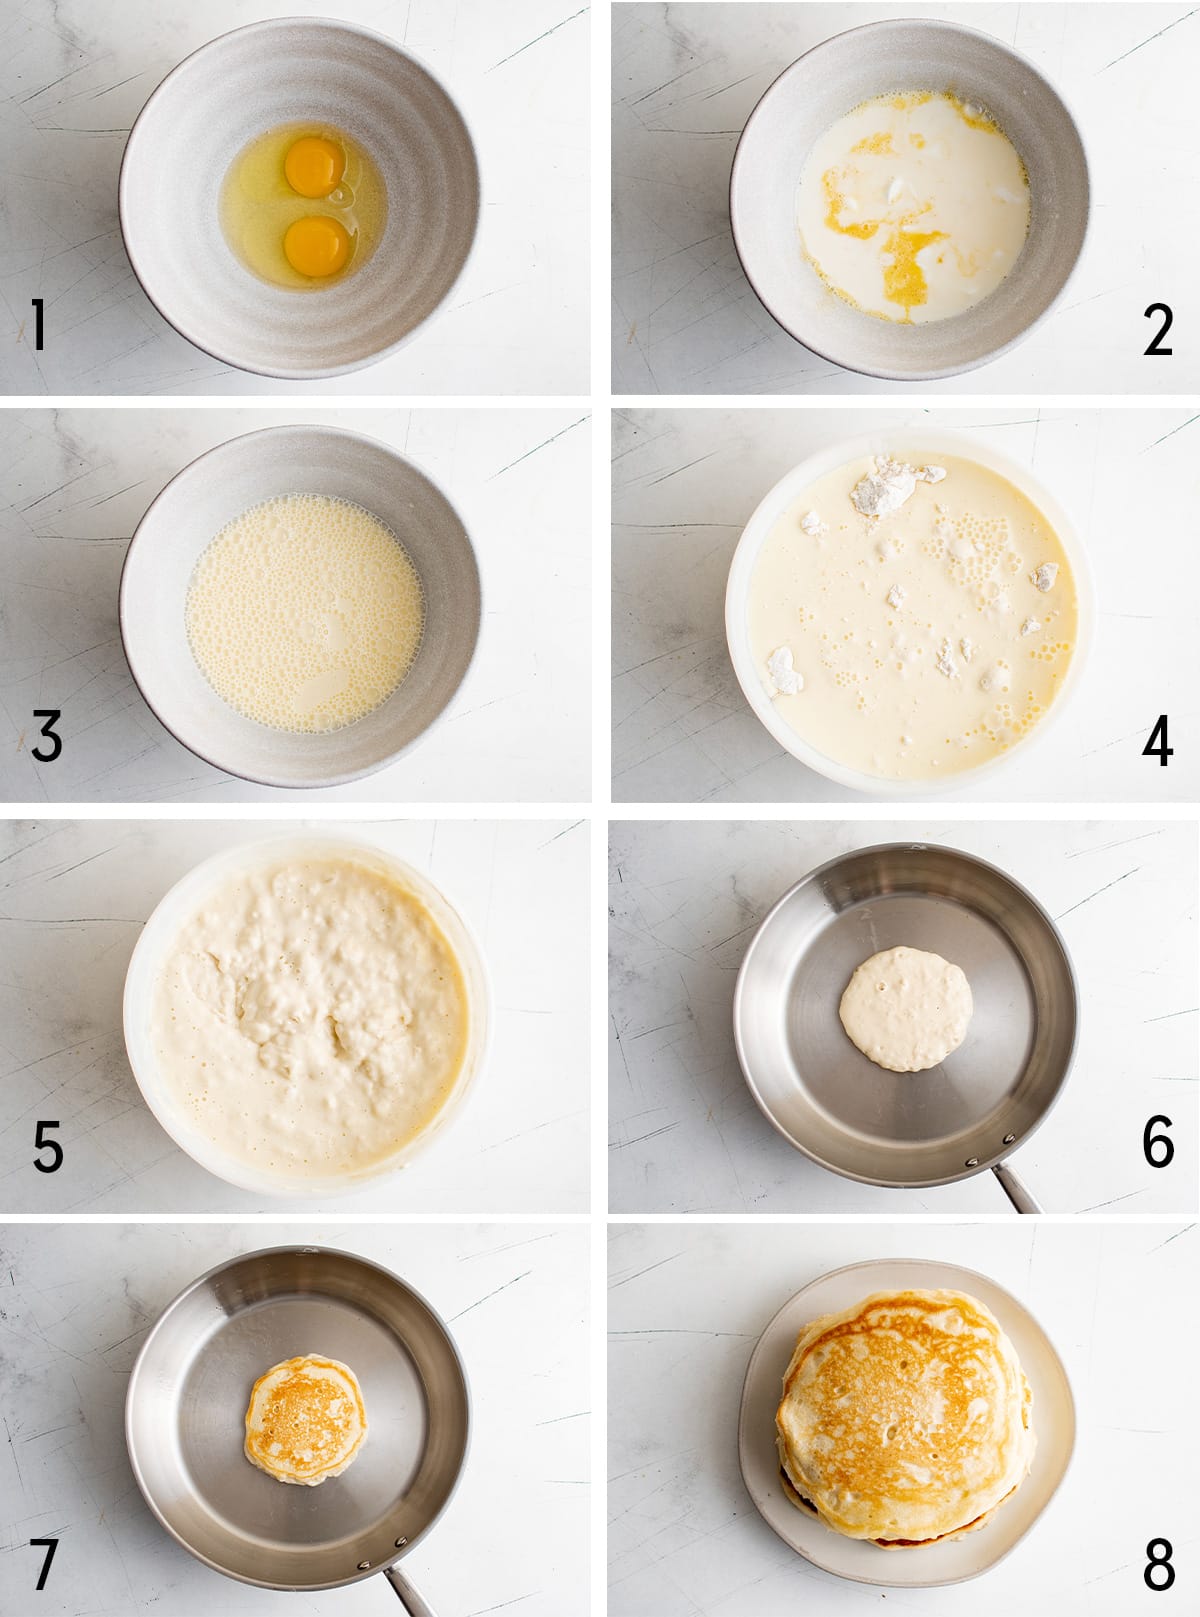 Collage of images showing the steps for how to make pancakes.